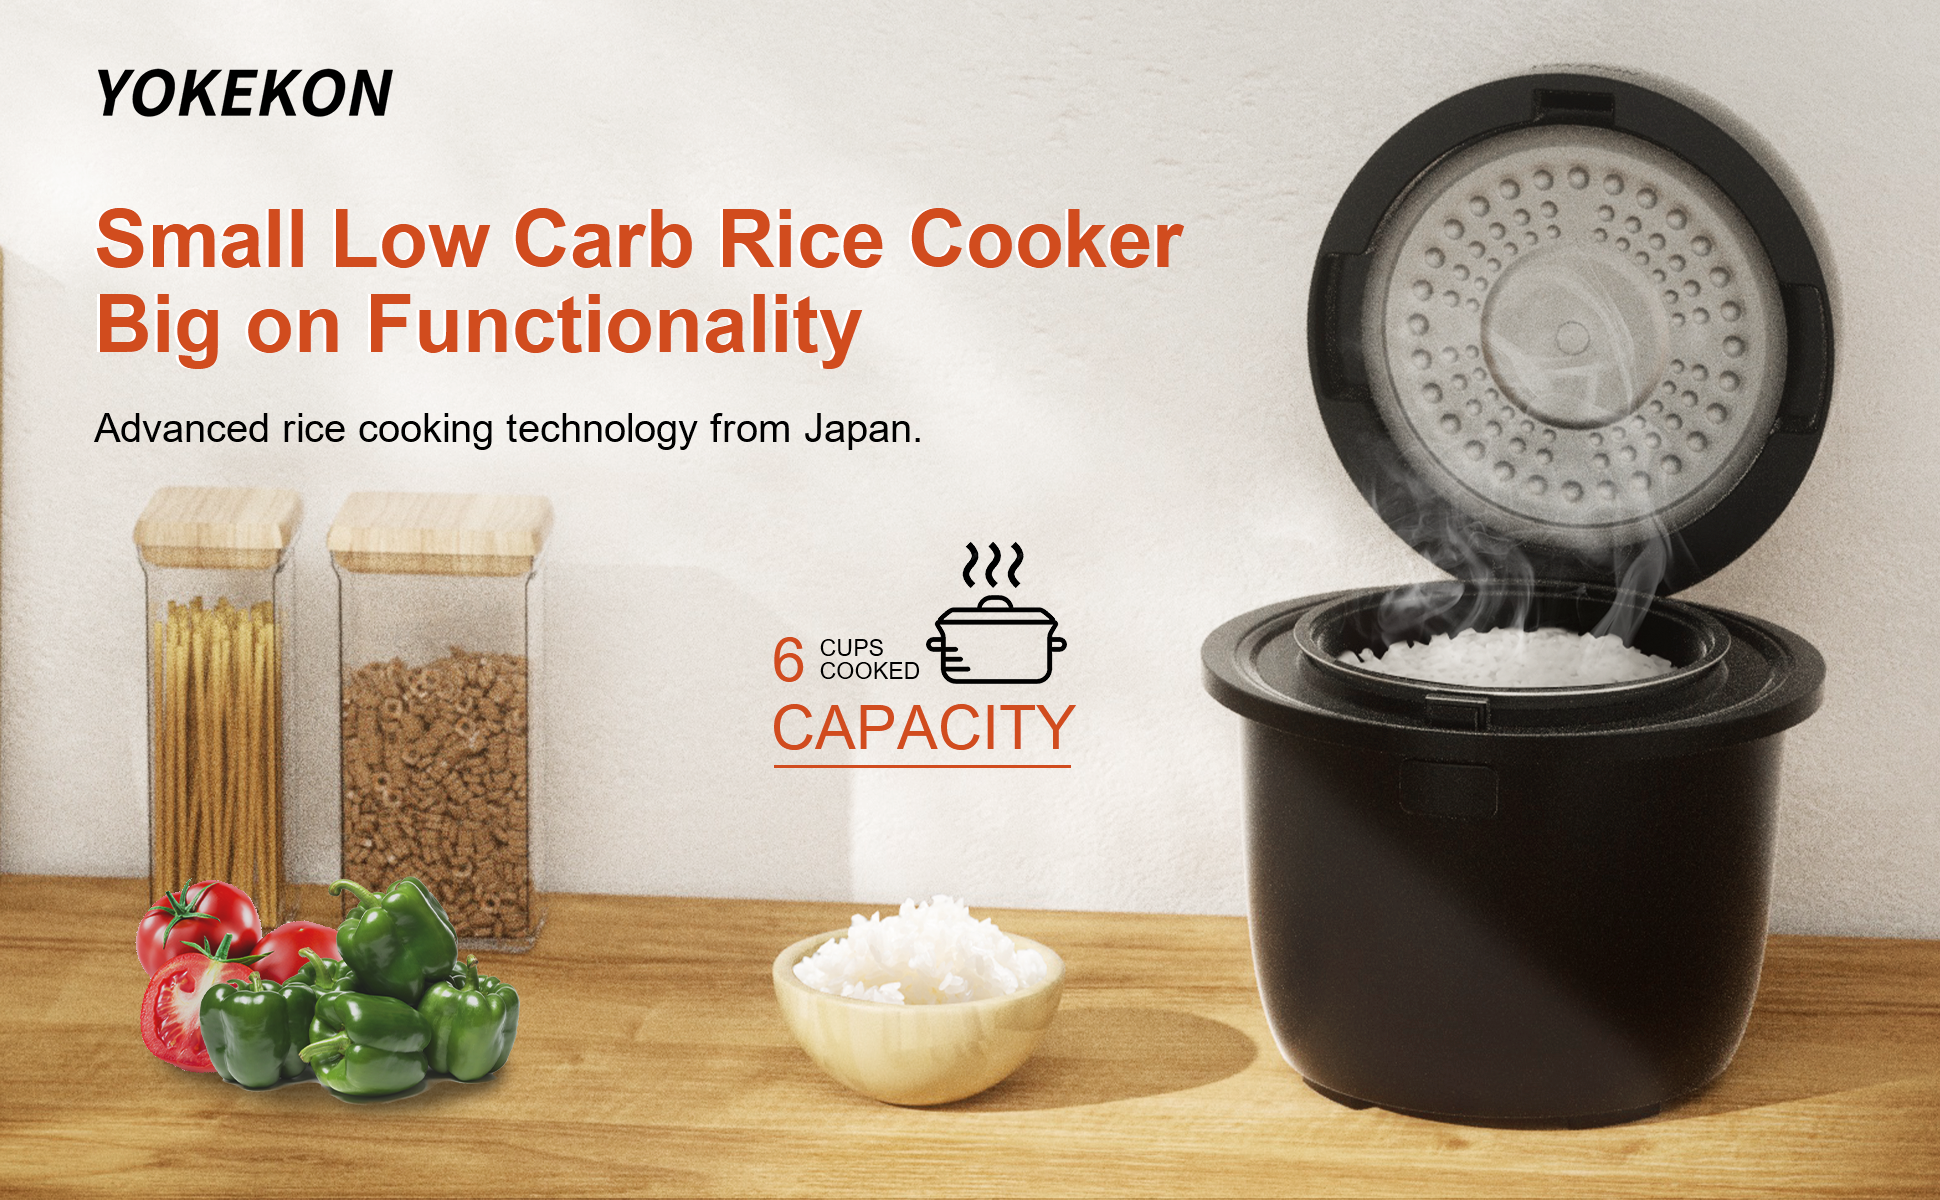 Rice Cooker Small Low Carb, 6-cup (cooked)Rice Maker, 8-in-1 Rice Cooker  with Stainless Steel Steamer, Delay Timer and Auto Keep Warm Feature,  Sushi, Risitto, Steamer, Cake 